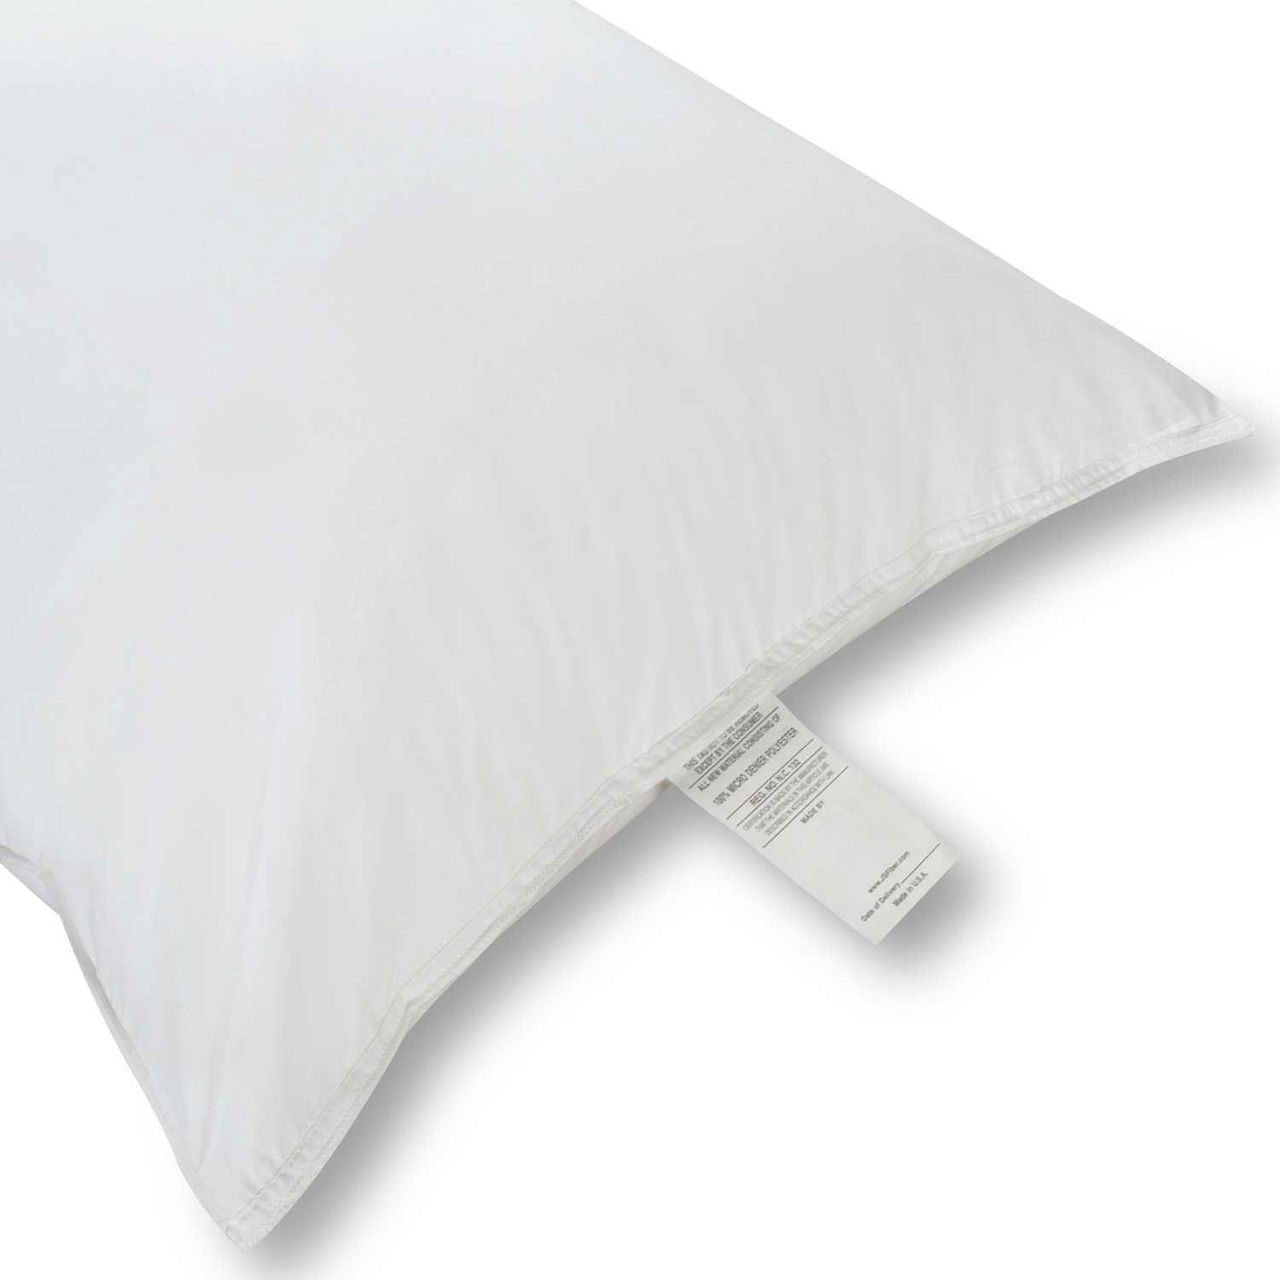 Ultra Down Pillow Questions & Answers